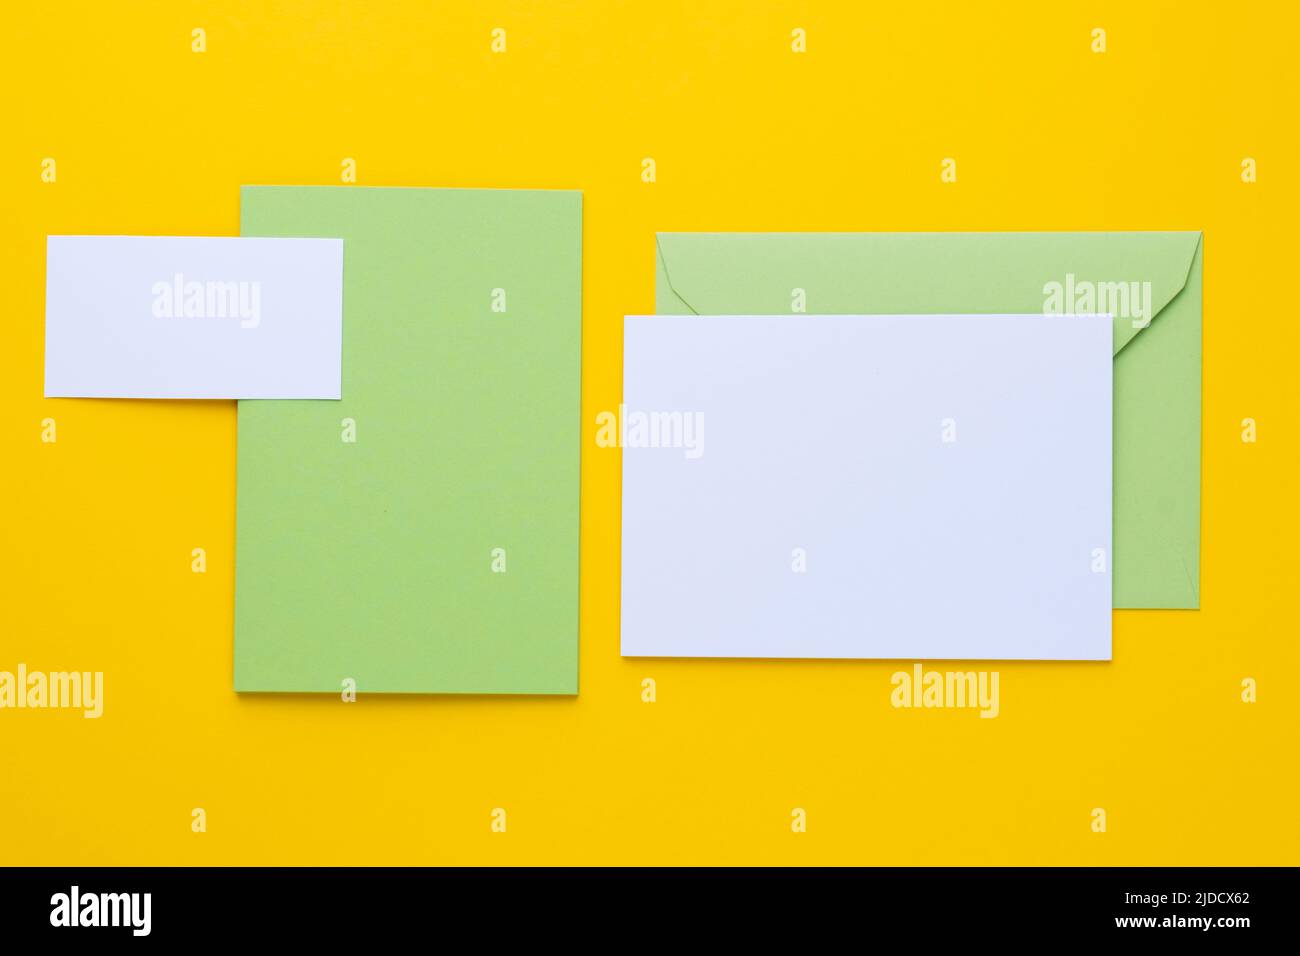 Set of branding elements on yellow background. Mock up for graphic designers presentations or business portfolios. Stock Photo